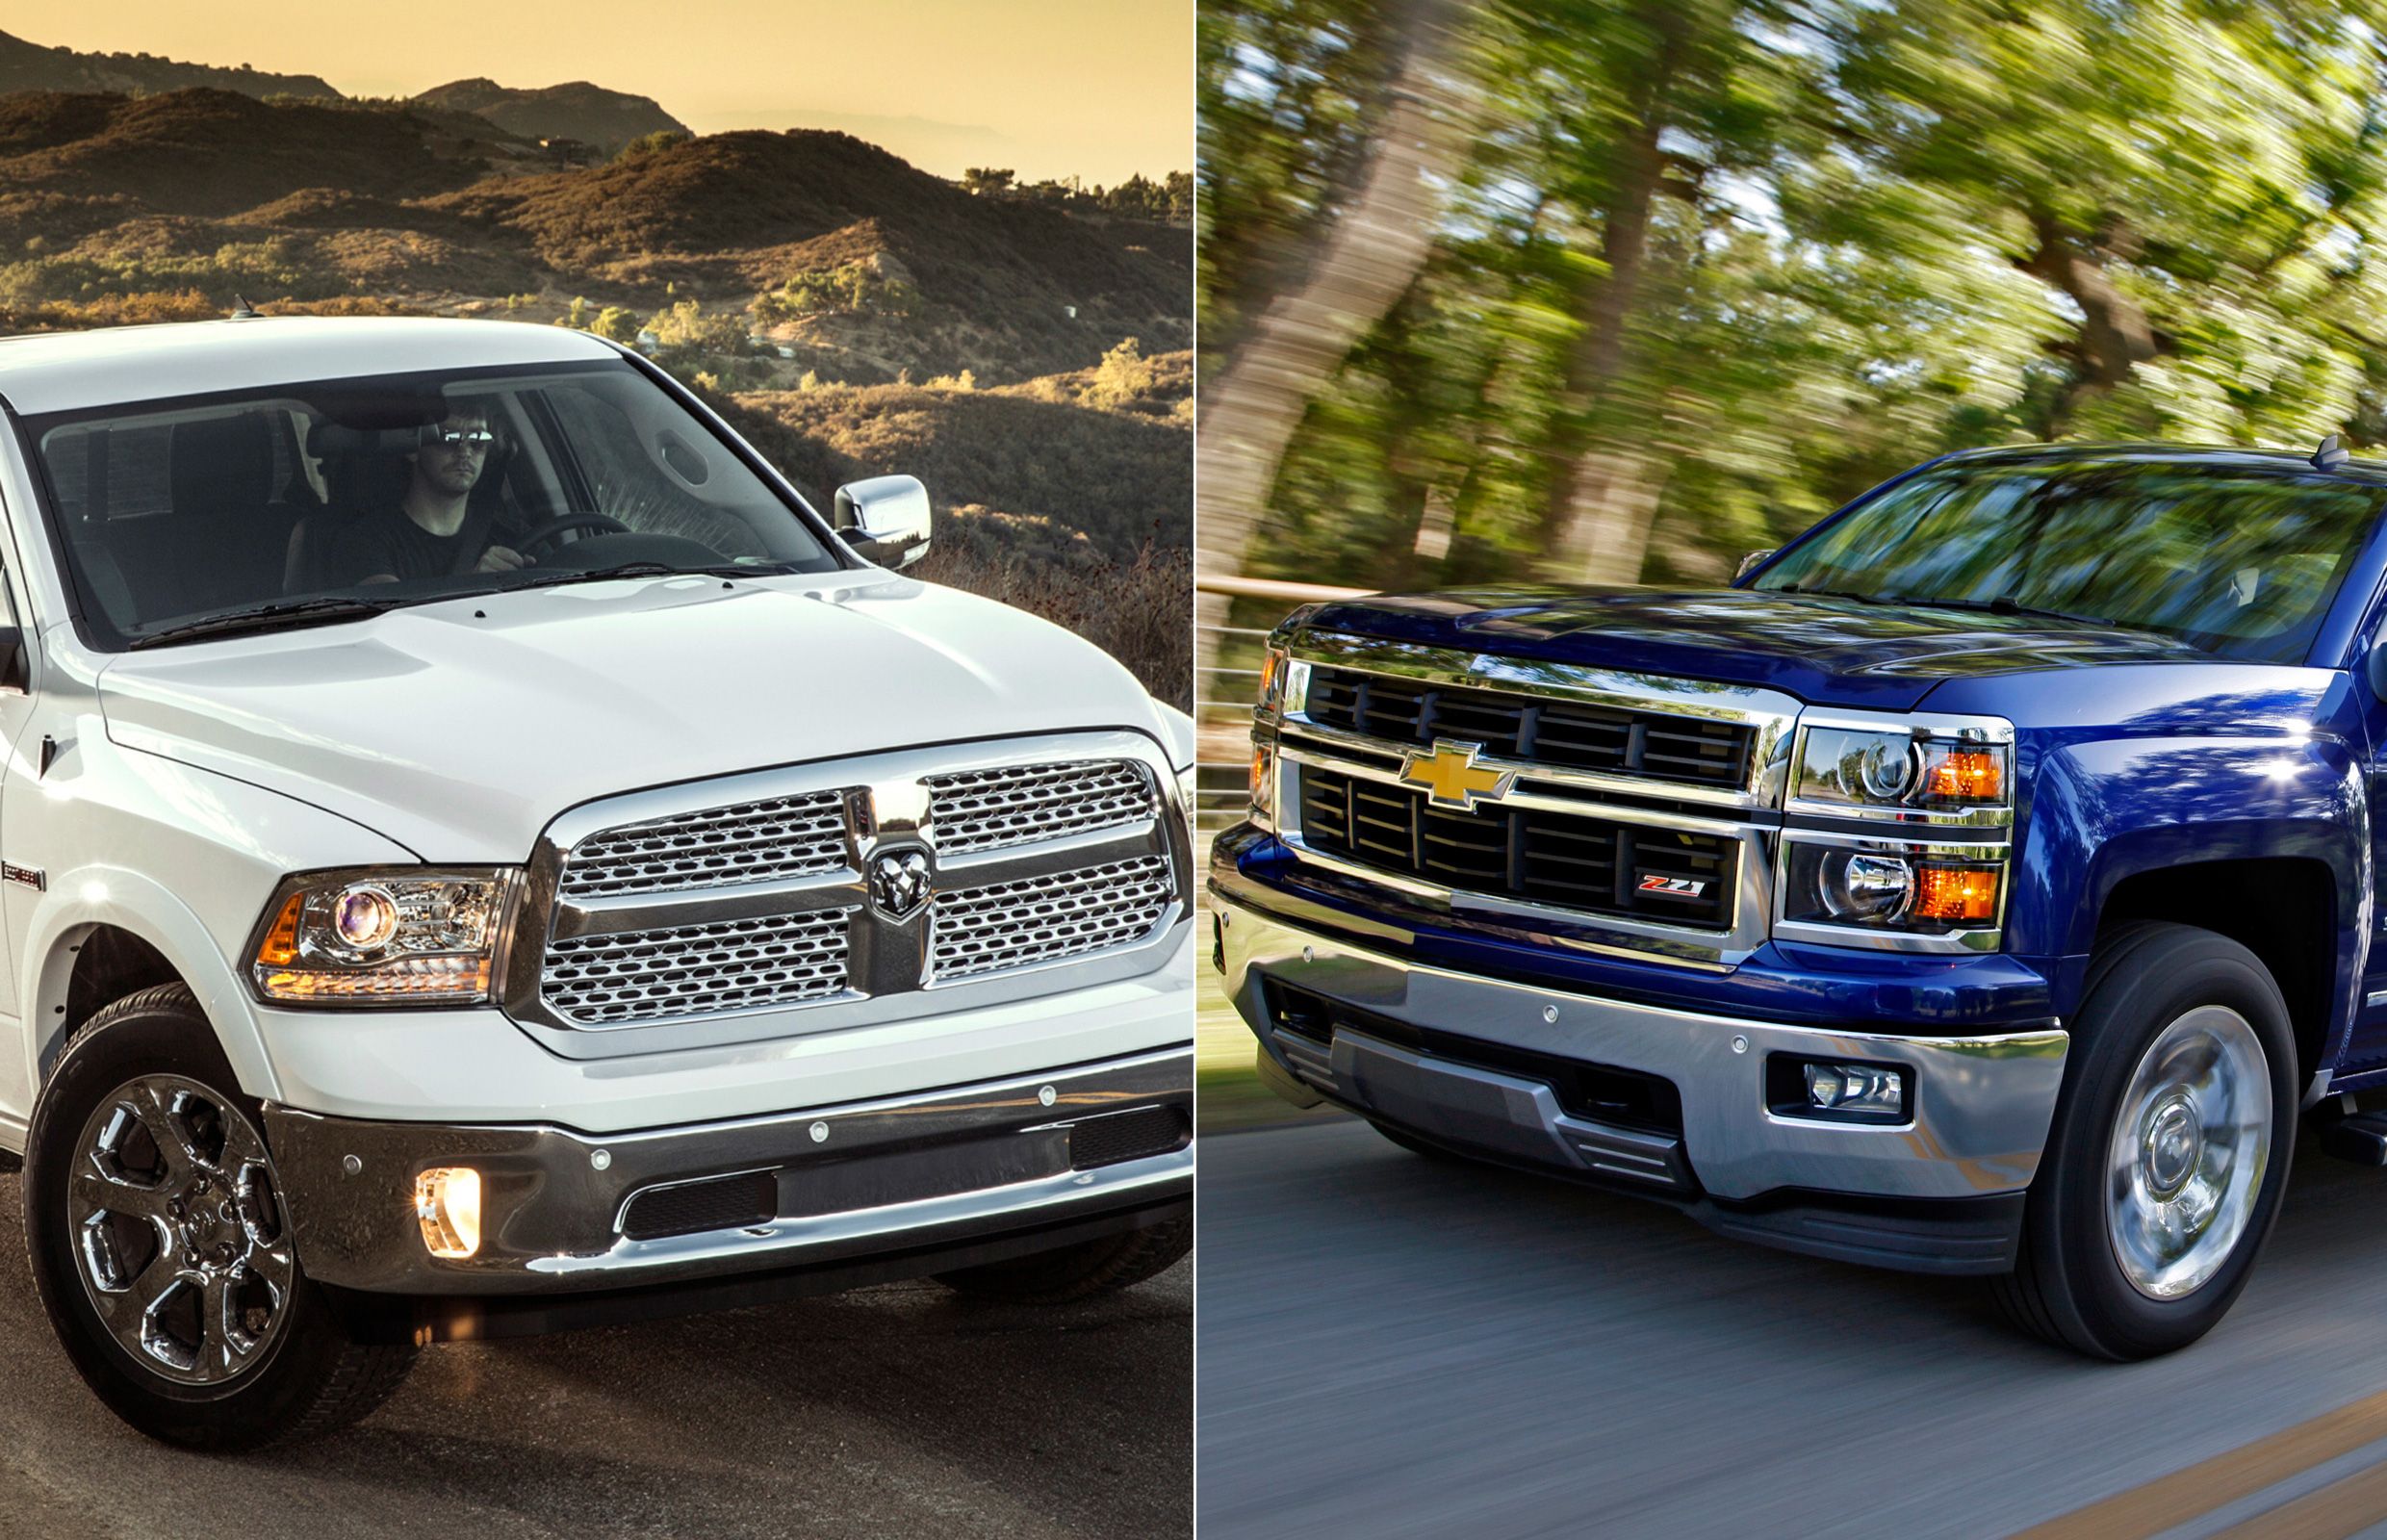 Chevy vs. Dodge: Battle of the Brands